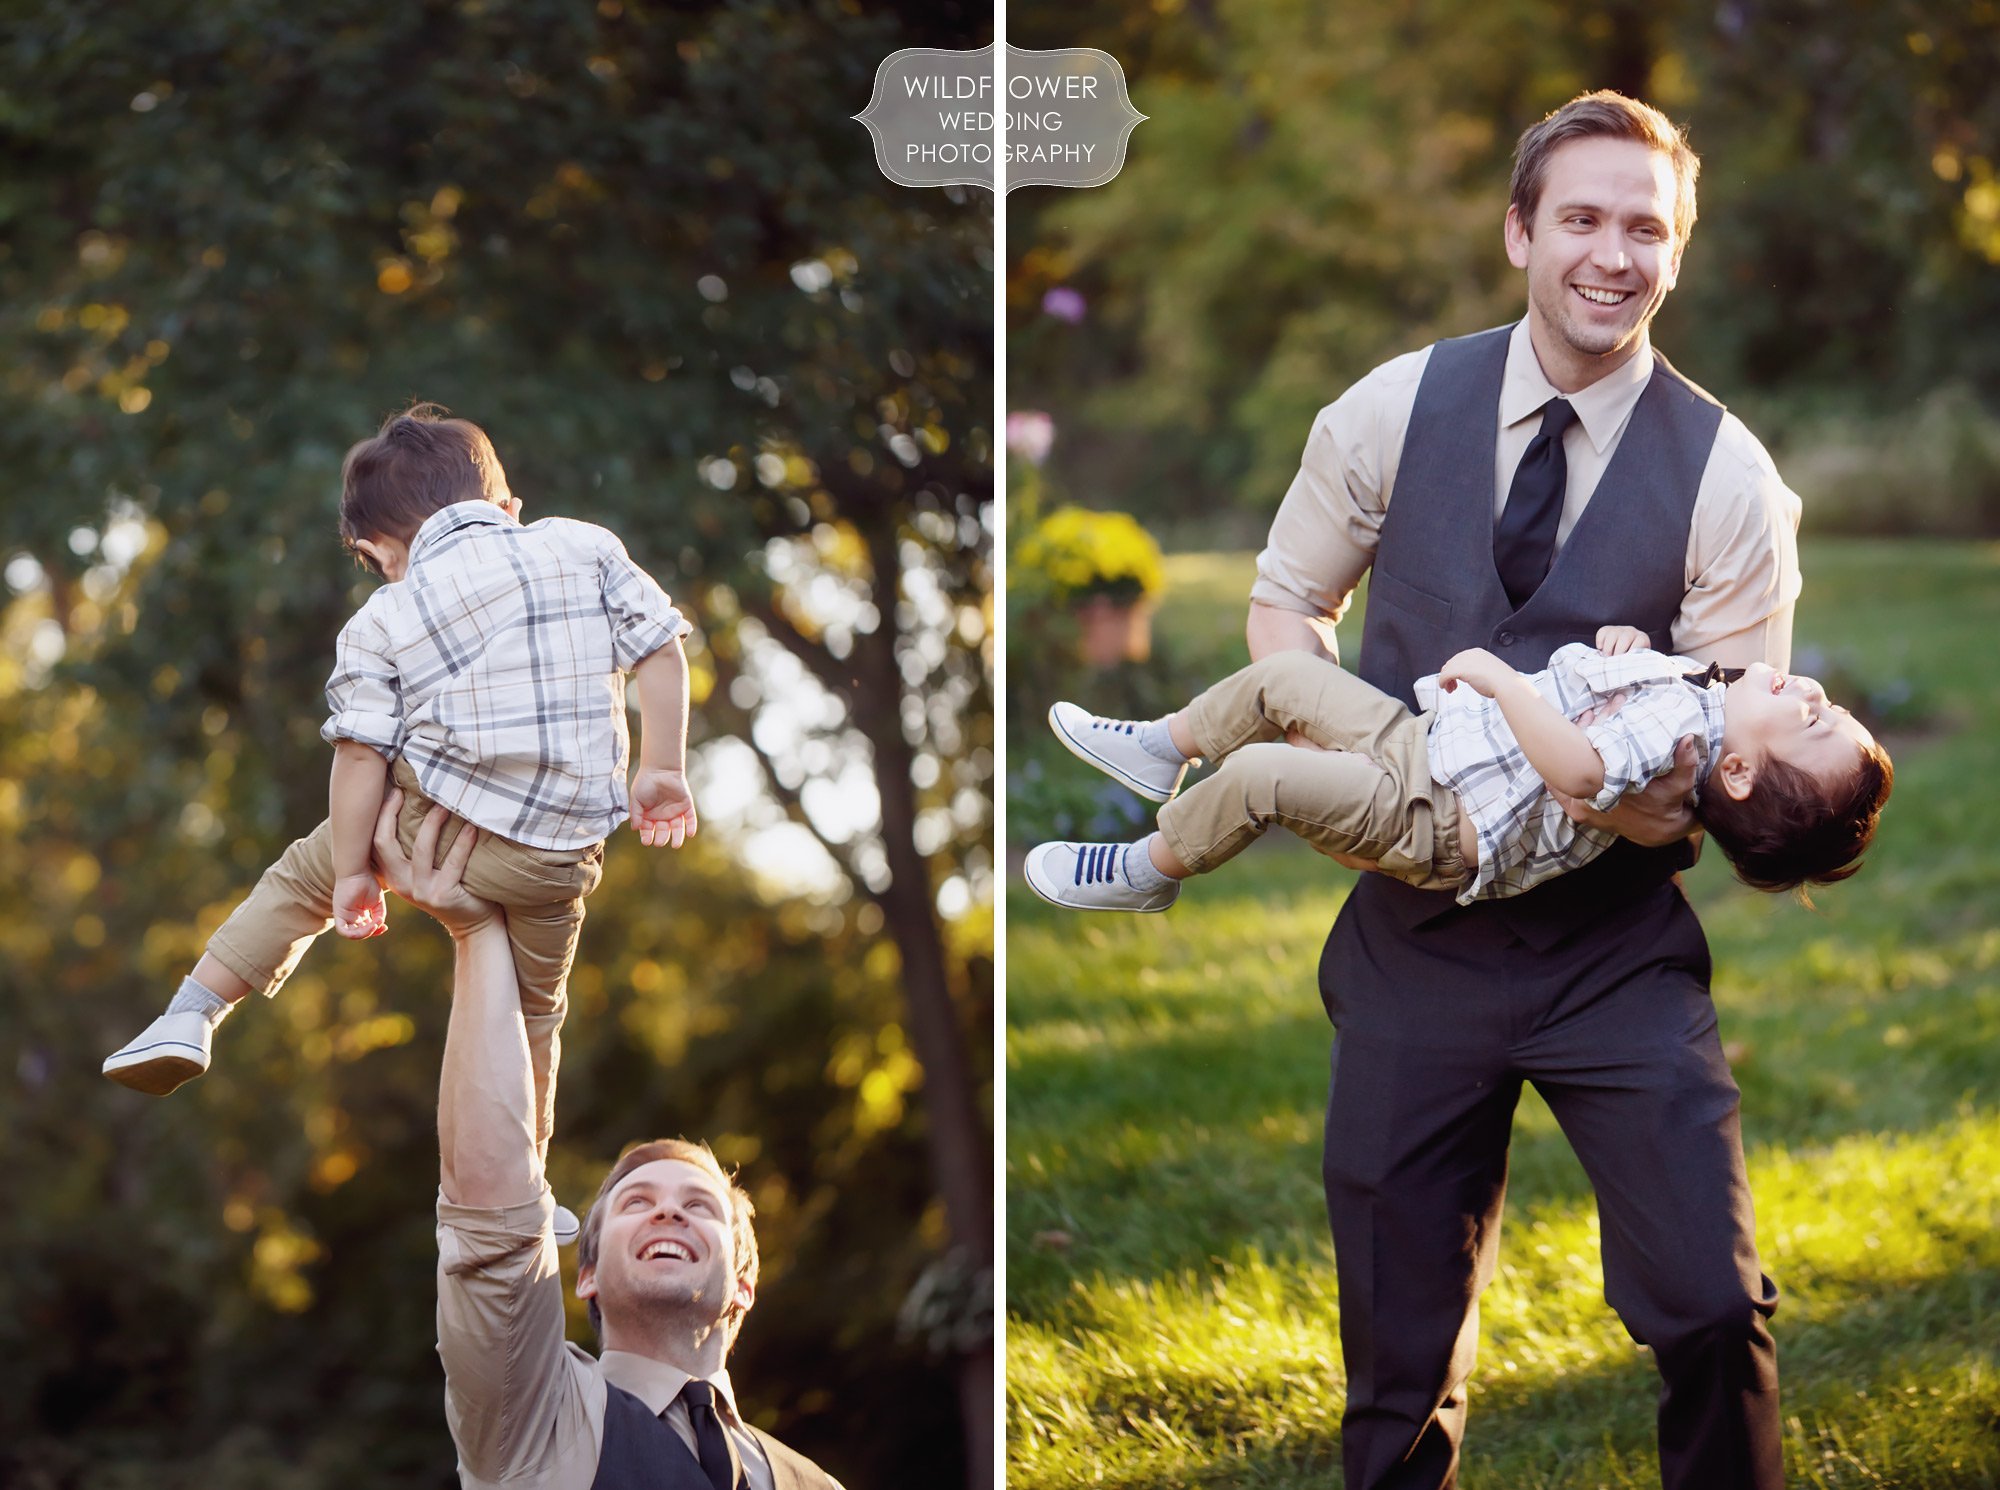 Great family photos of a dad and his son during this backyard wedding reception in St. Louis.